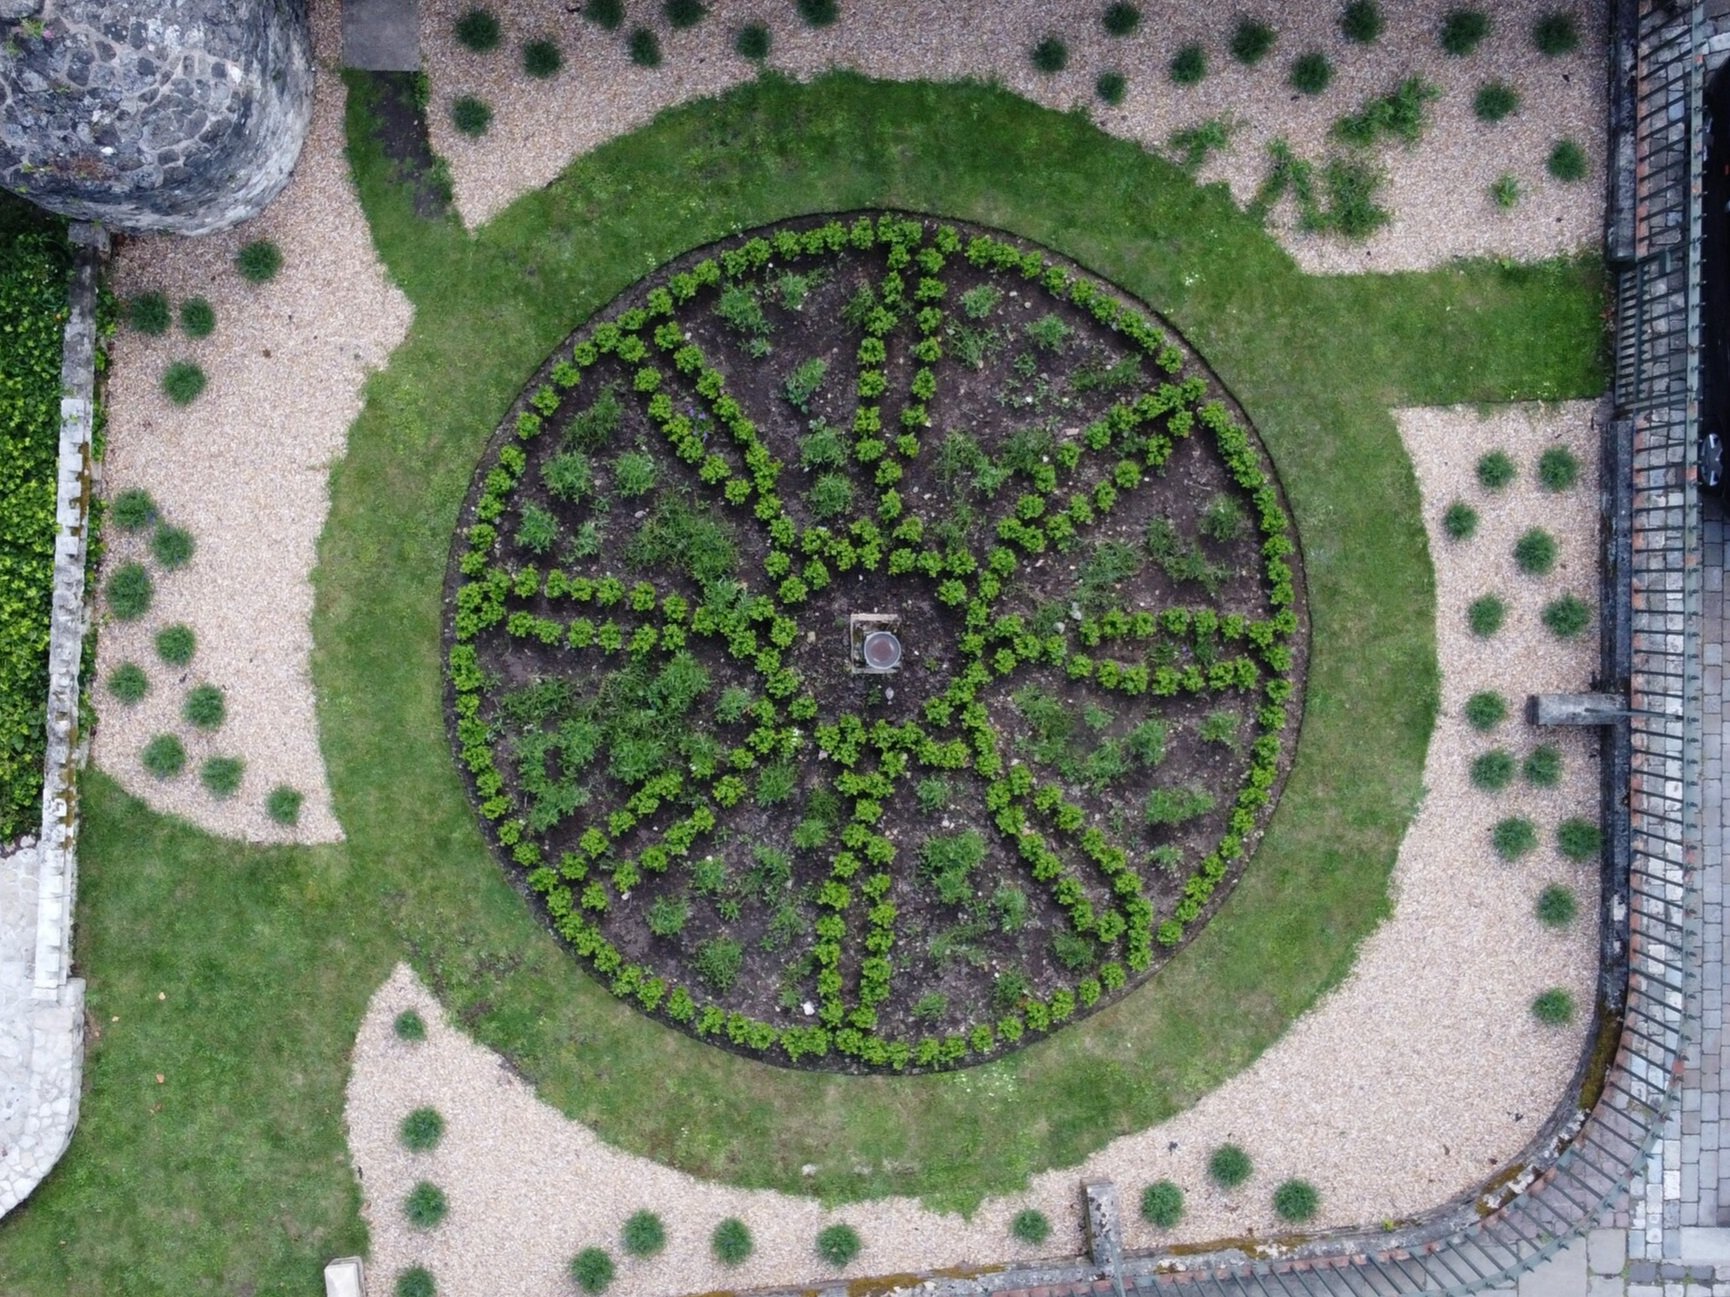 Photograph of the new Knot Garden by Geoff Watkins, Aerial Imaging South East.